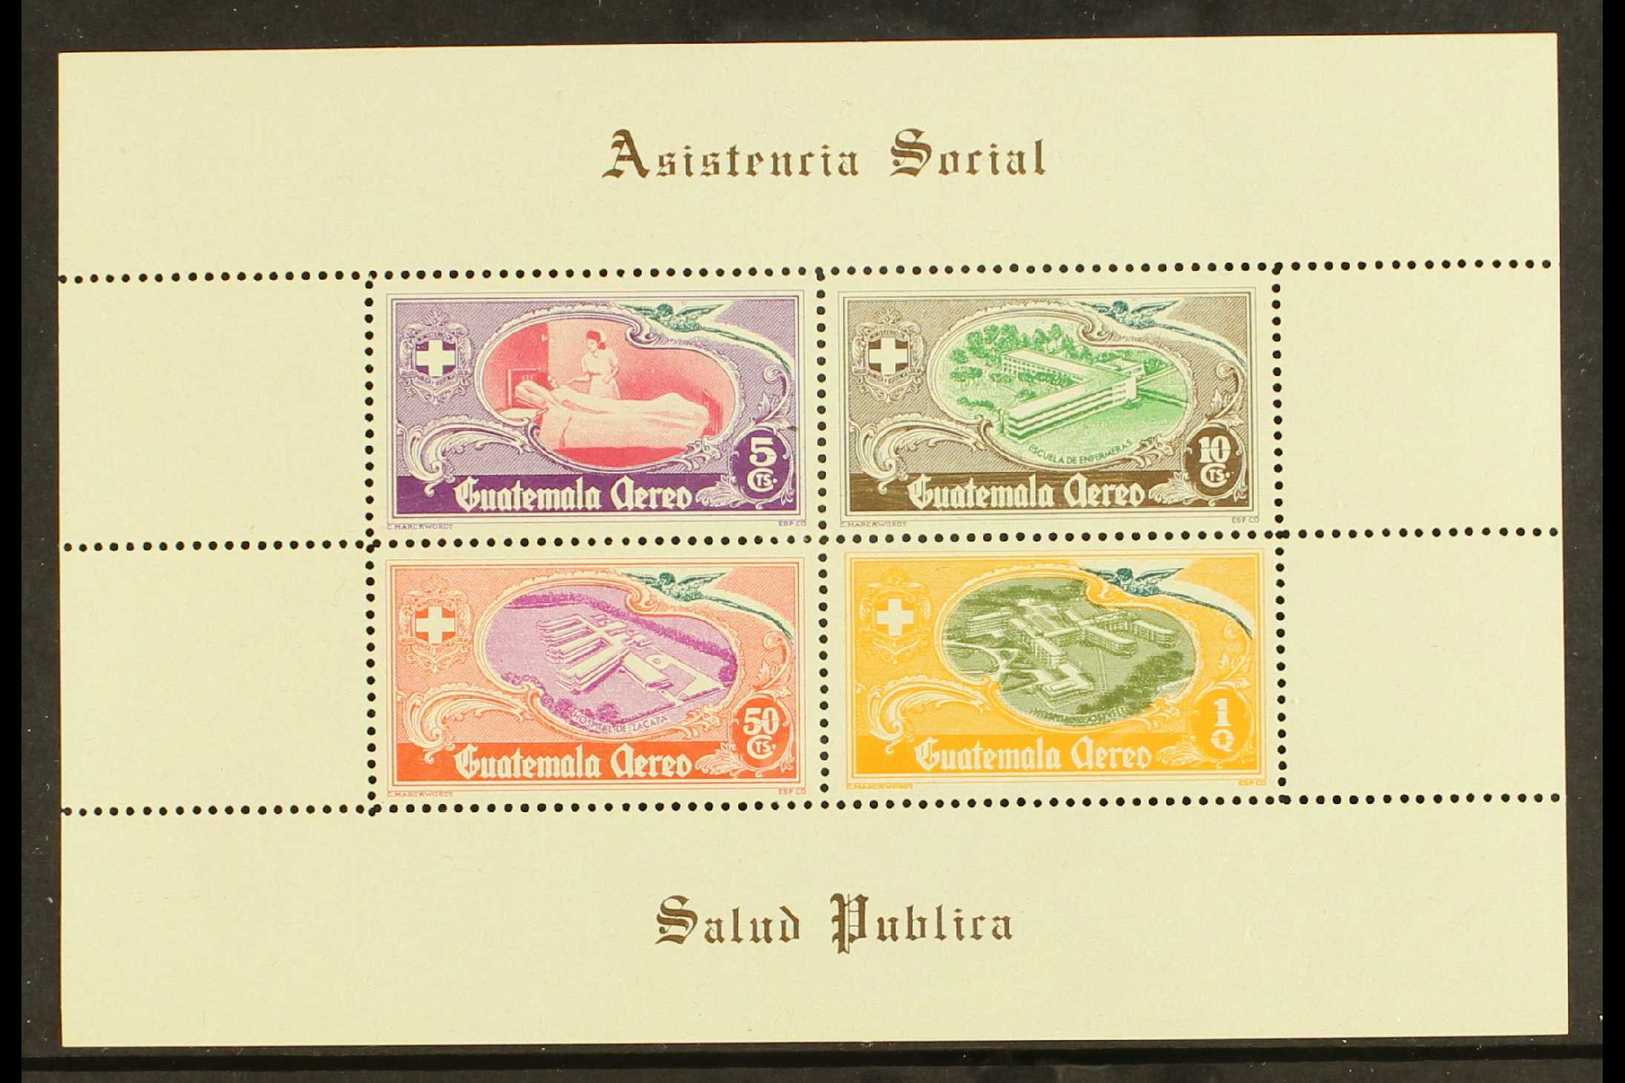 1950  National Hospital Fund Airs Miniature Sheet Showing DOUBLE PRINTED Olive Colour, As SG MS515, Scott C180a, Fine Ne - Guatemala